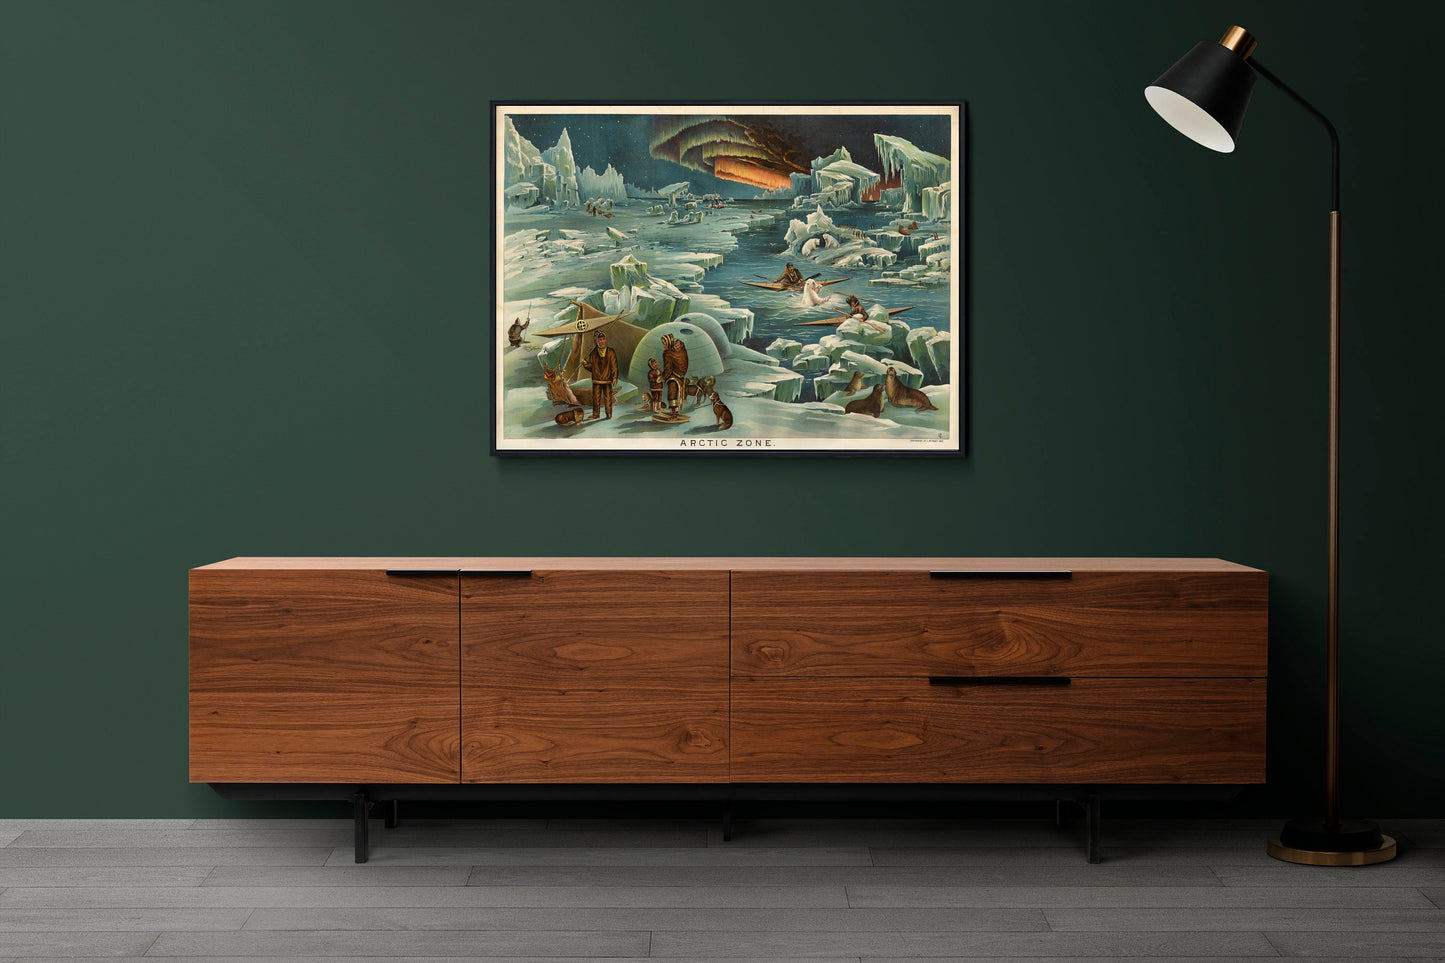 Artic Zone by Levi Walter Yaggy | Scientific Bedroom Poster | Boys Bedroom Poster | Educational science poster | North Pole Print | Kids Art